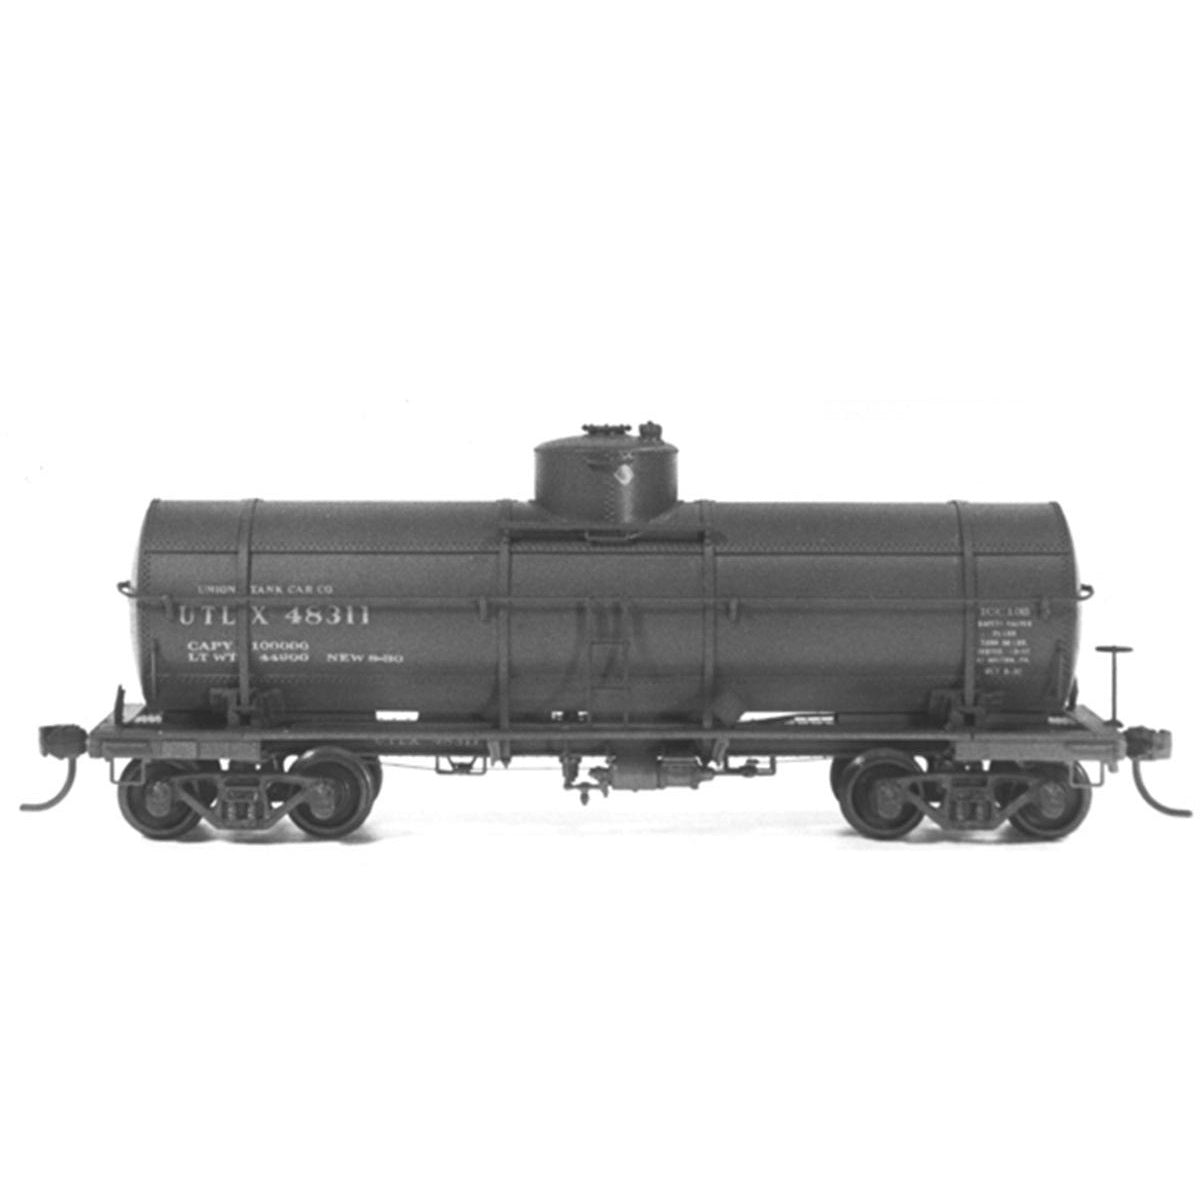 Tichy Train Group 60" Dome 10, 000 Gallon ICC Class 103 Tank Cars - Undecorated, HO Scale 6 Pack